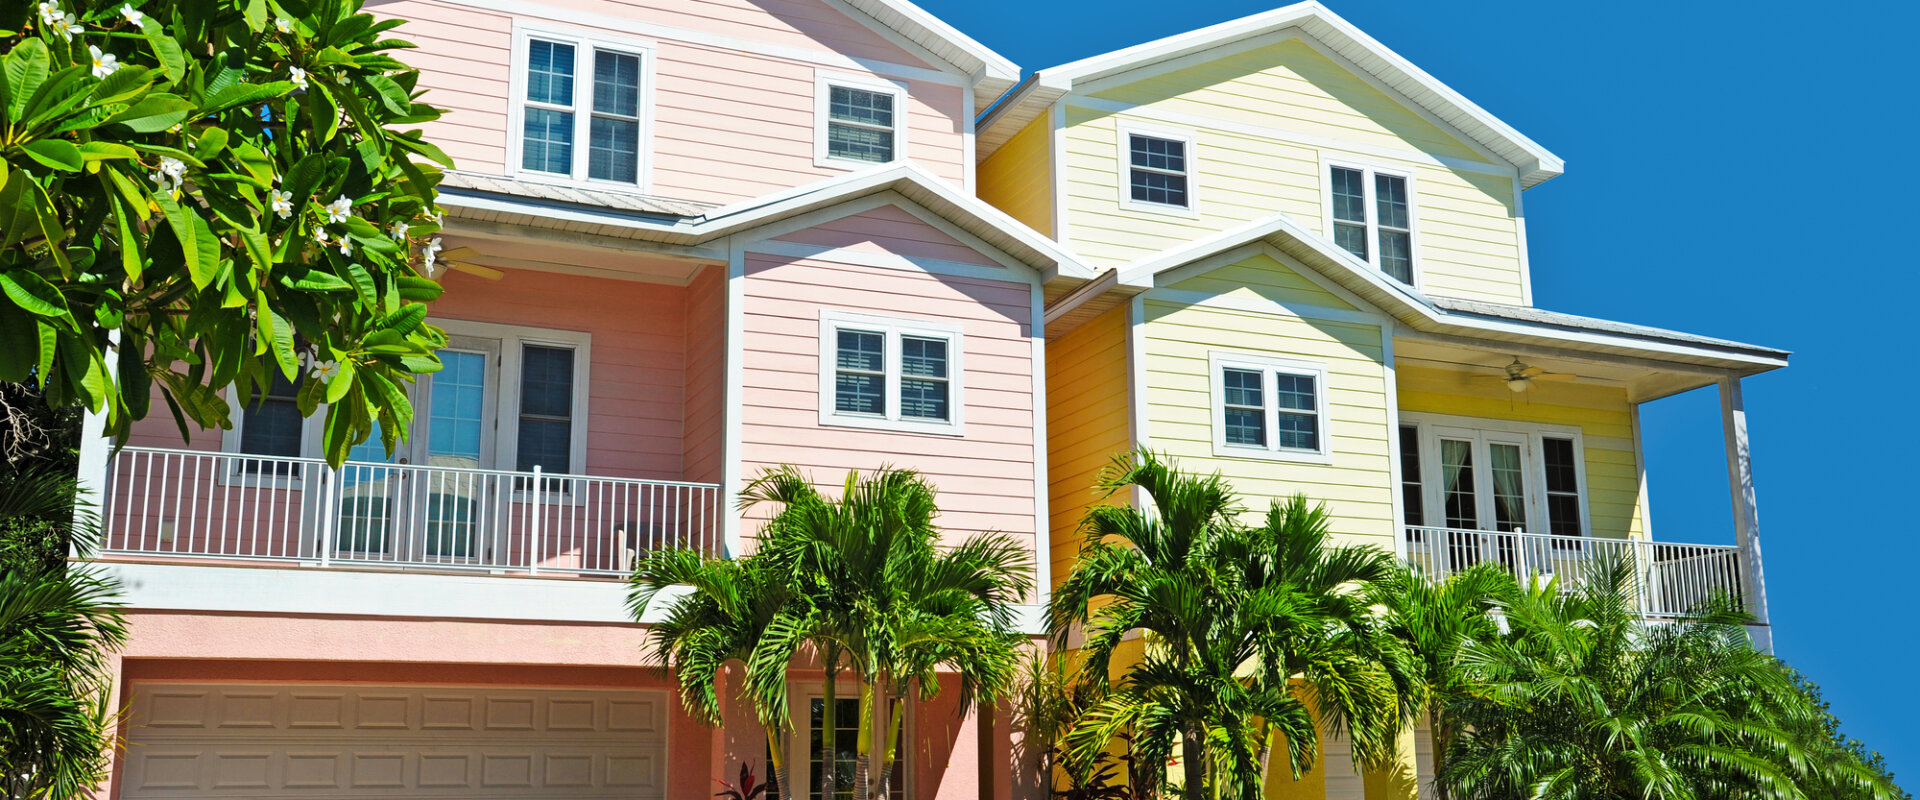 5 ways to stop foreclosure in Florida